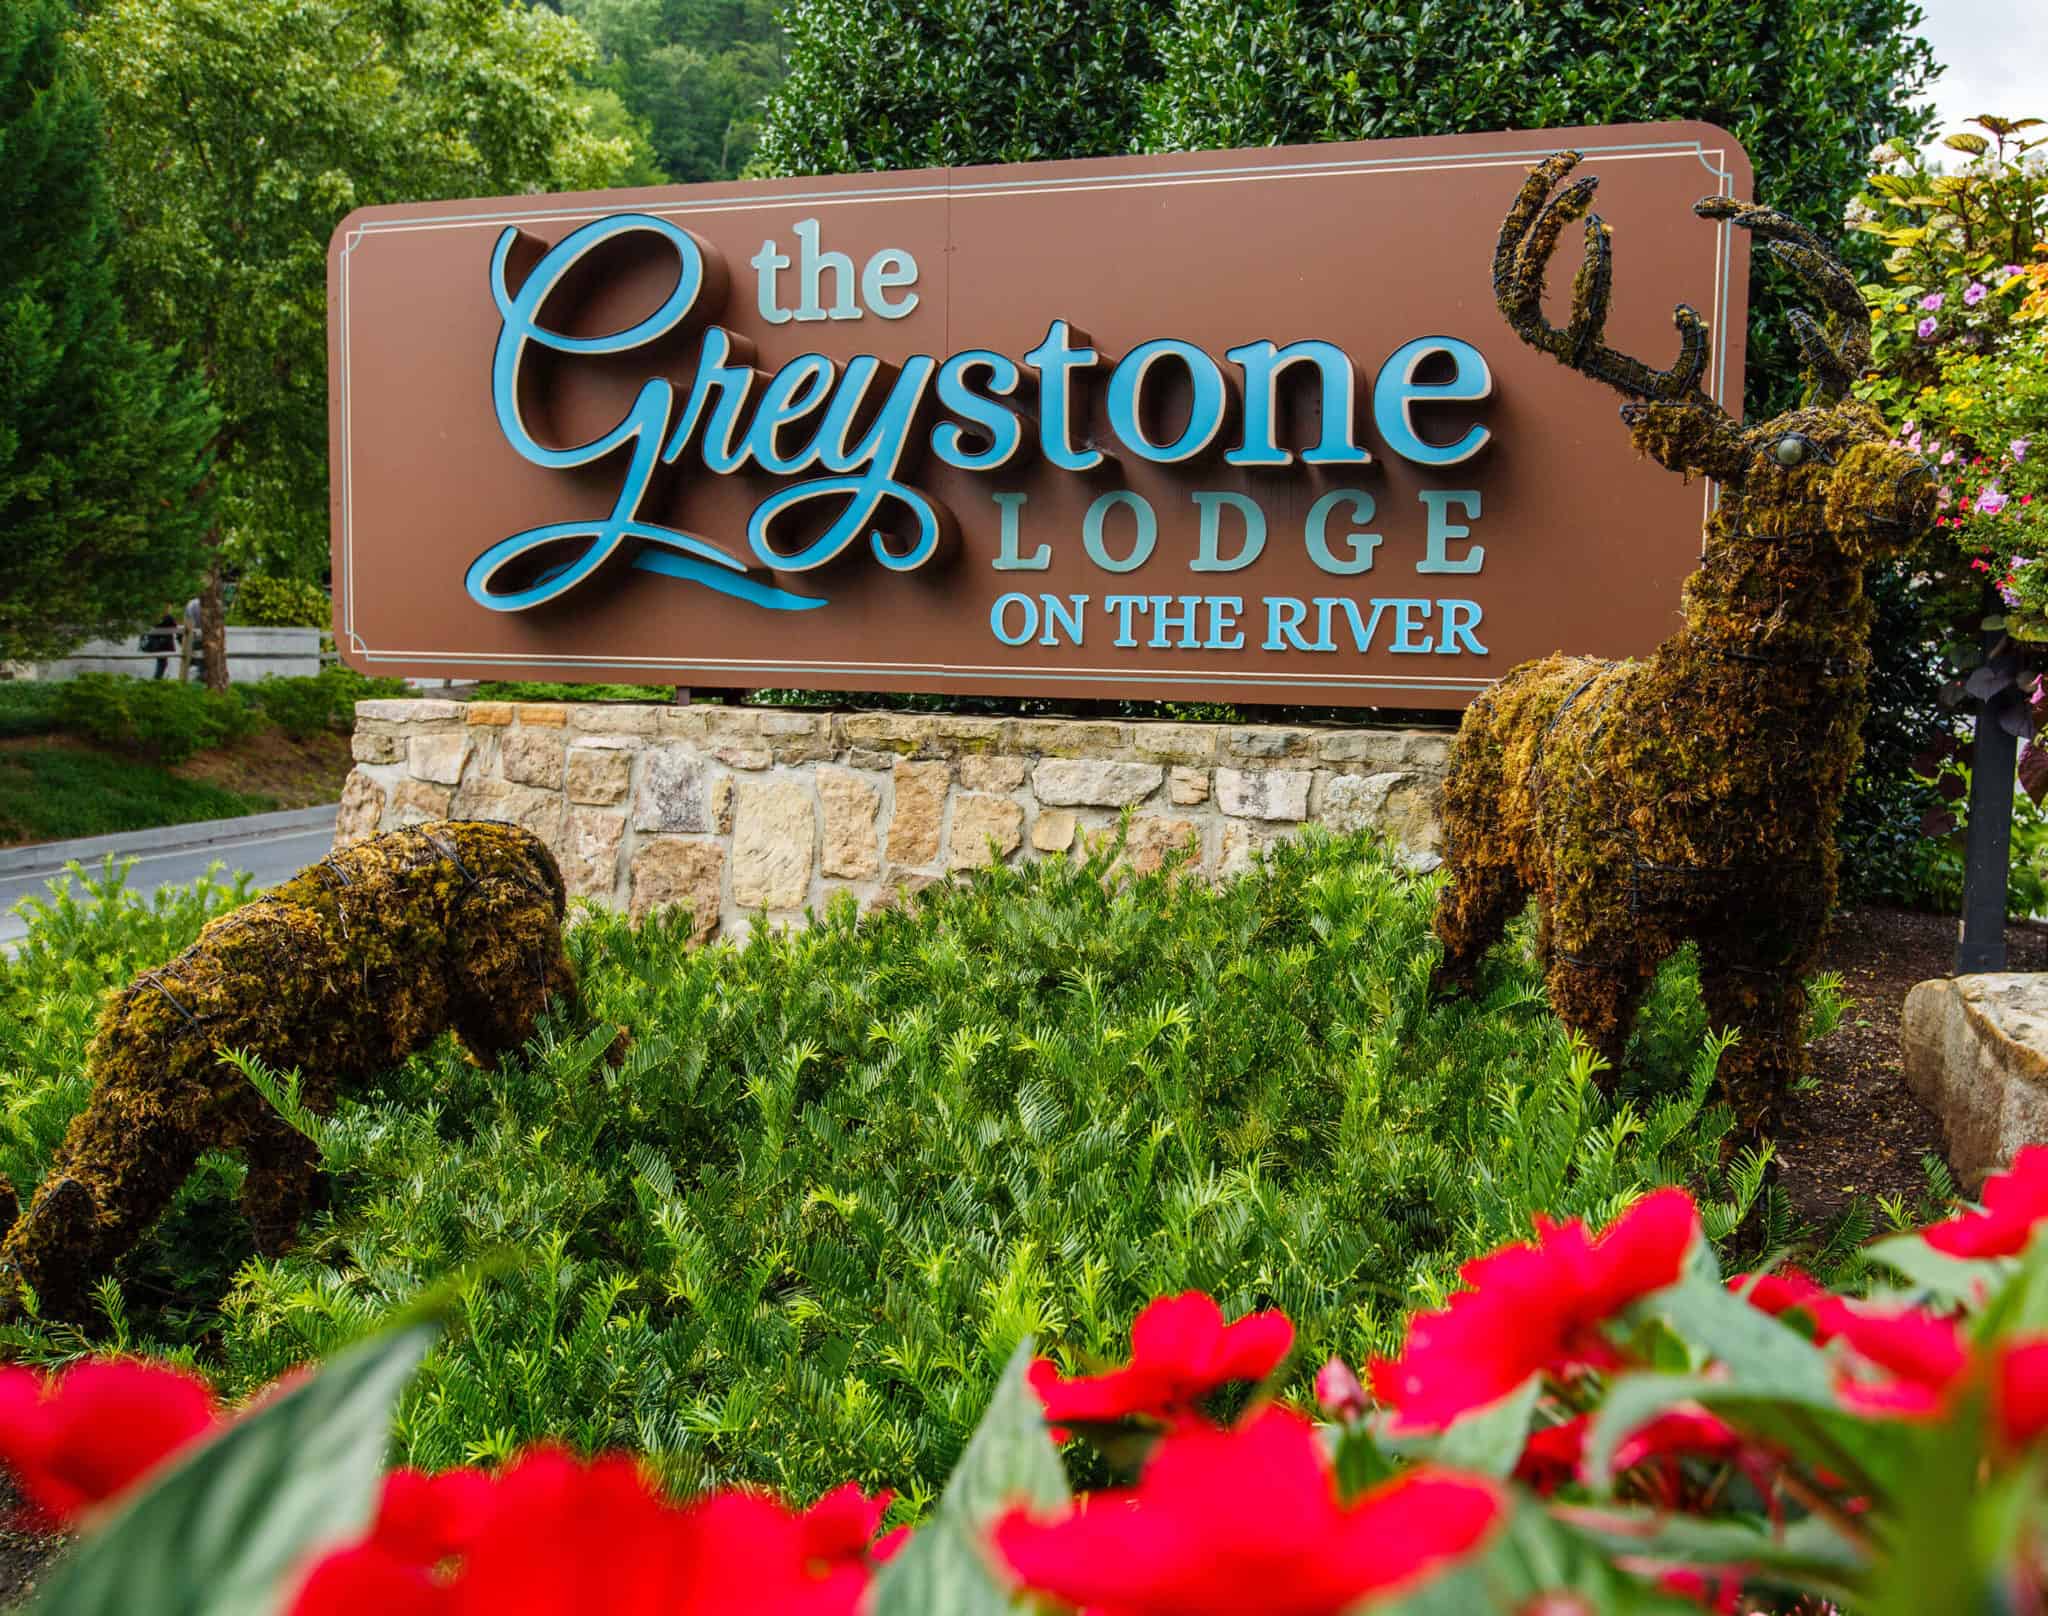 Greystone Lodge on the River